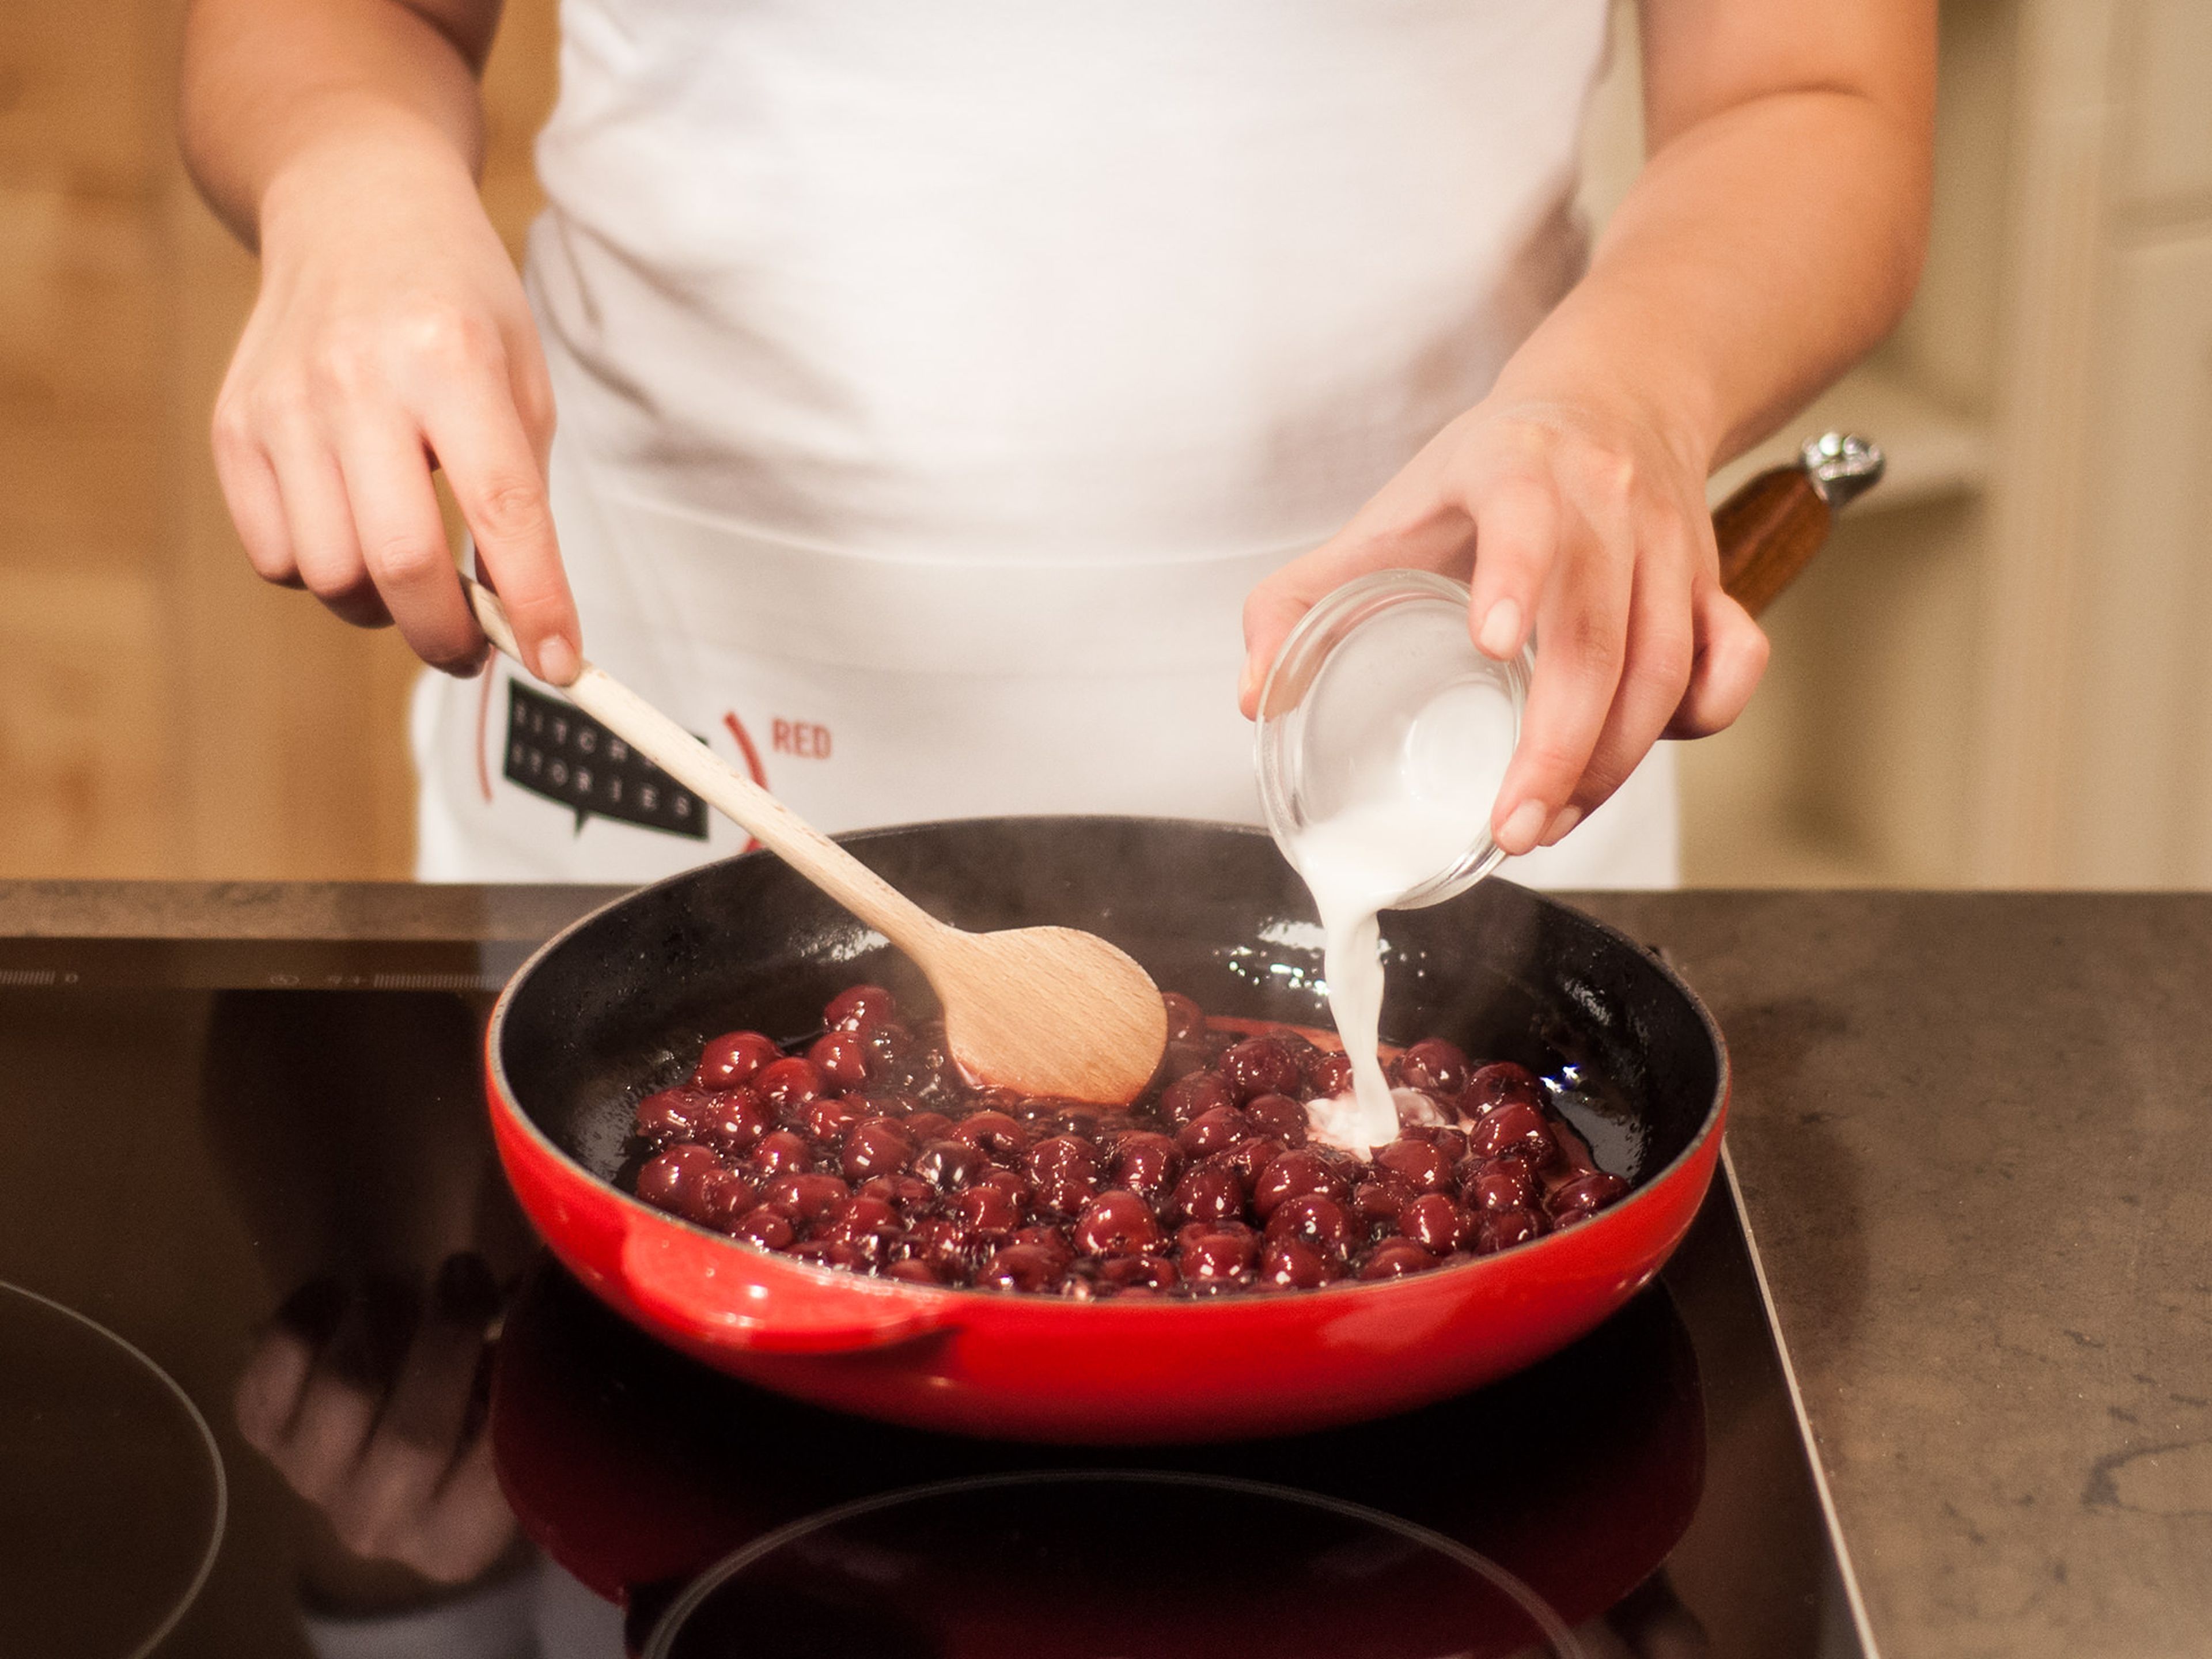 In the meantime, dissolve remaining cornstarch in some water. Add mixture to the sauce until thickened to desired consistency. Serve hot cherries on top of a piece of the cake. Add some confectioner’s sugar to liking.